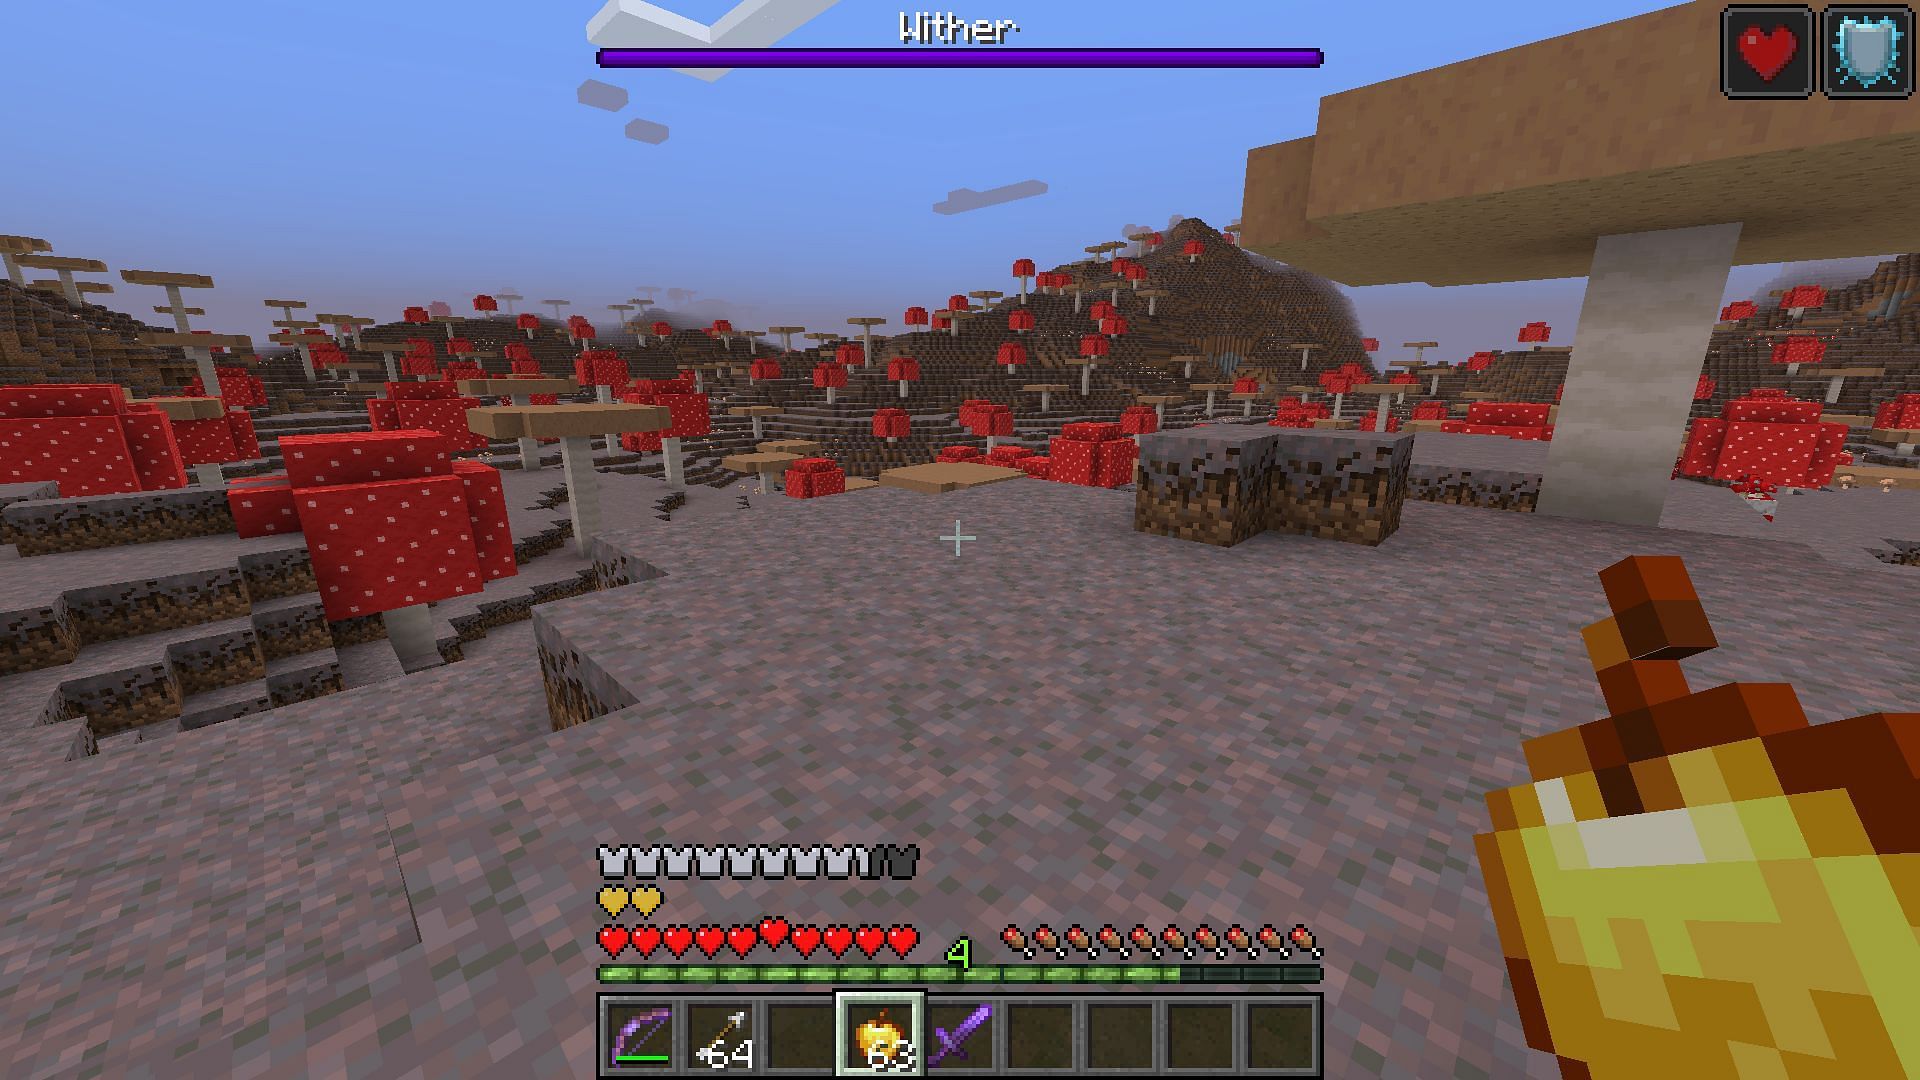 Mushroom Fields don't have trees, but they also don't spawn hostile mobs in Minecraft (Image via Mojang)